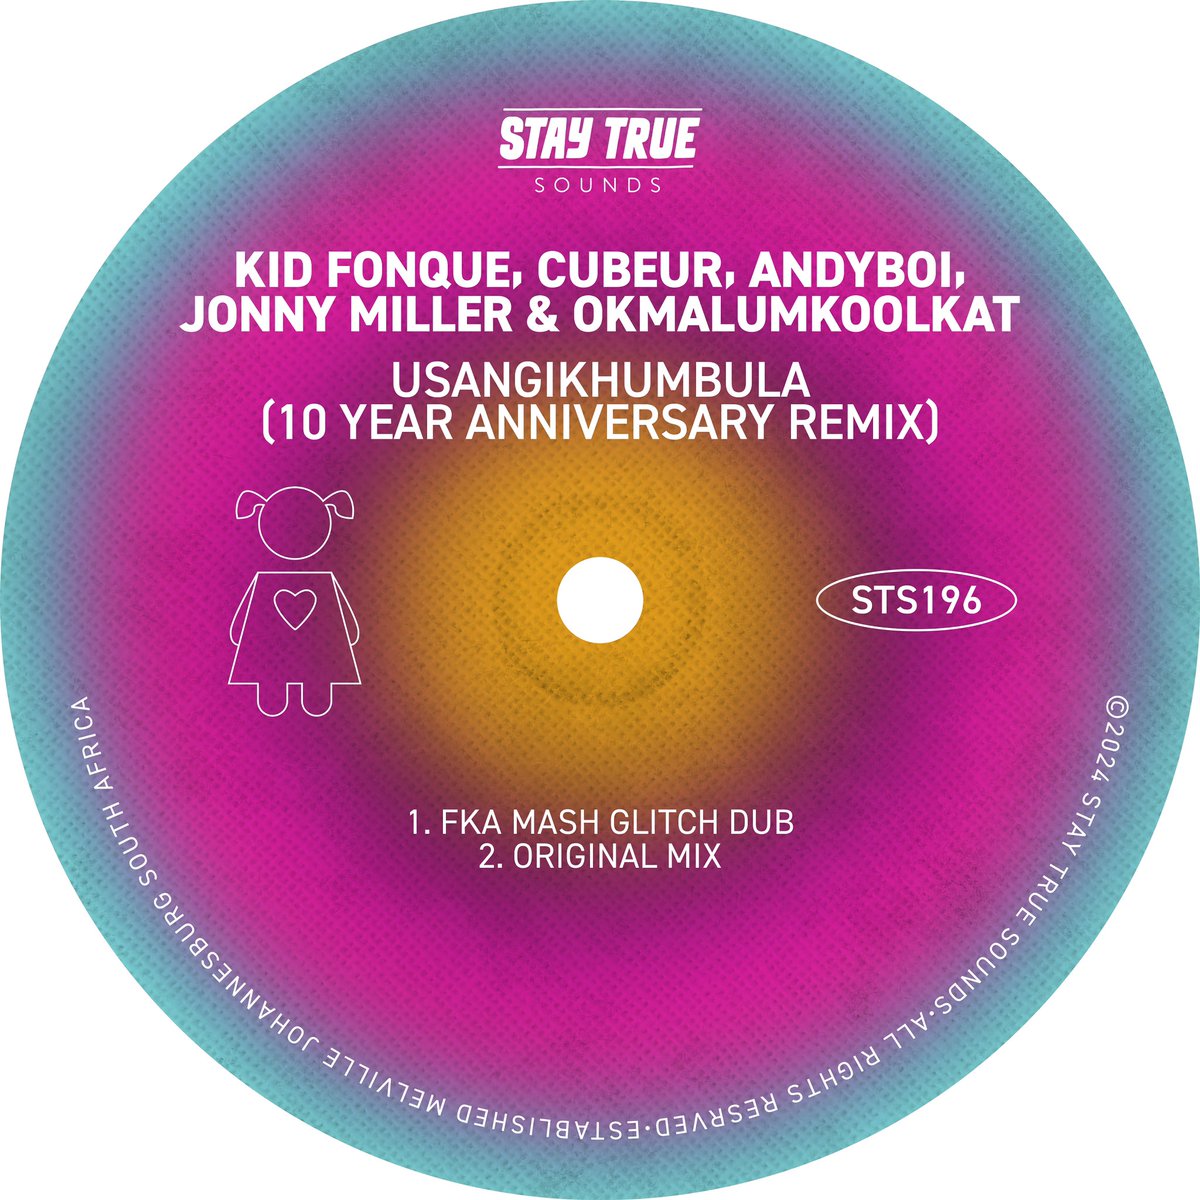 🏆10 years later, Usangikhumbula’ by @Kidfonque, @Cuebur, @Andyboi, @jonnymiller & Okmalumkoolkat gets the @RealFkaMash touch with a groove-filled dub on @StayTrueSounds. Drop Friday 05/04/24🗓️📌 pre-save 👉🏼 staytruesounds.lnk.to/STS196B #deephouse #expensivemusic #staytruesounds